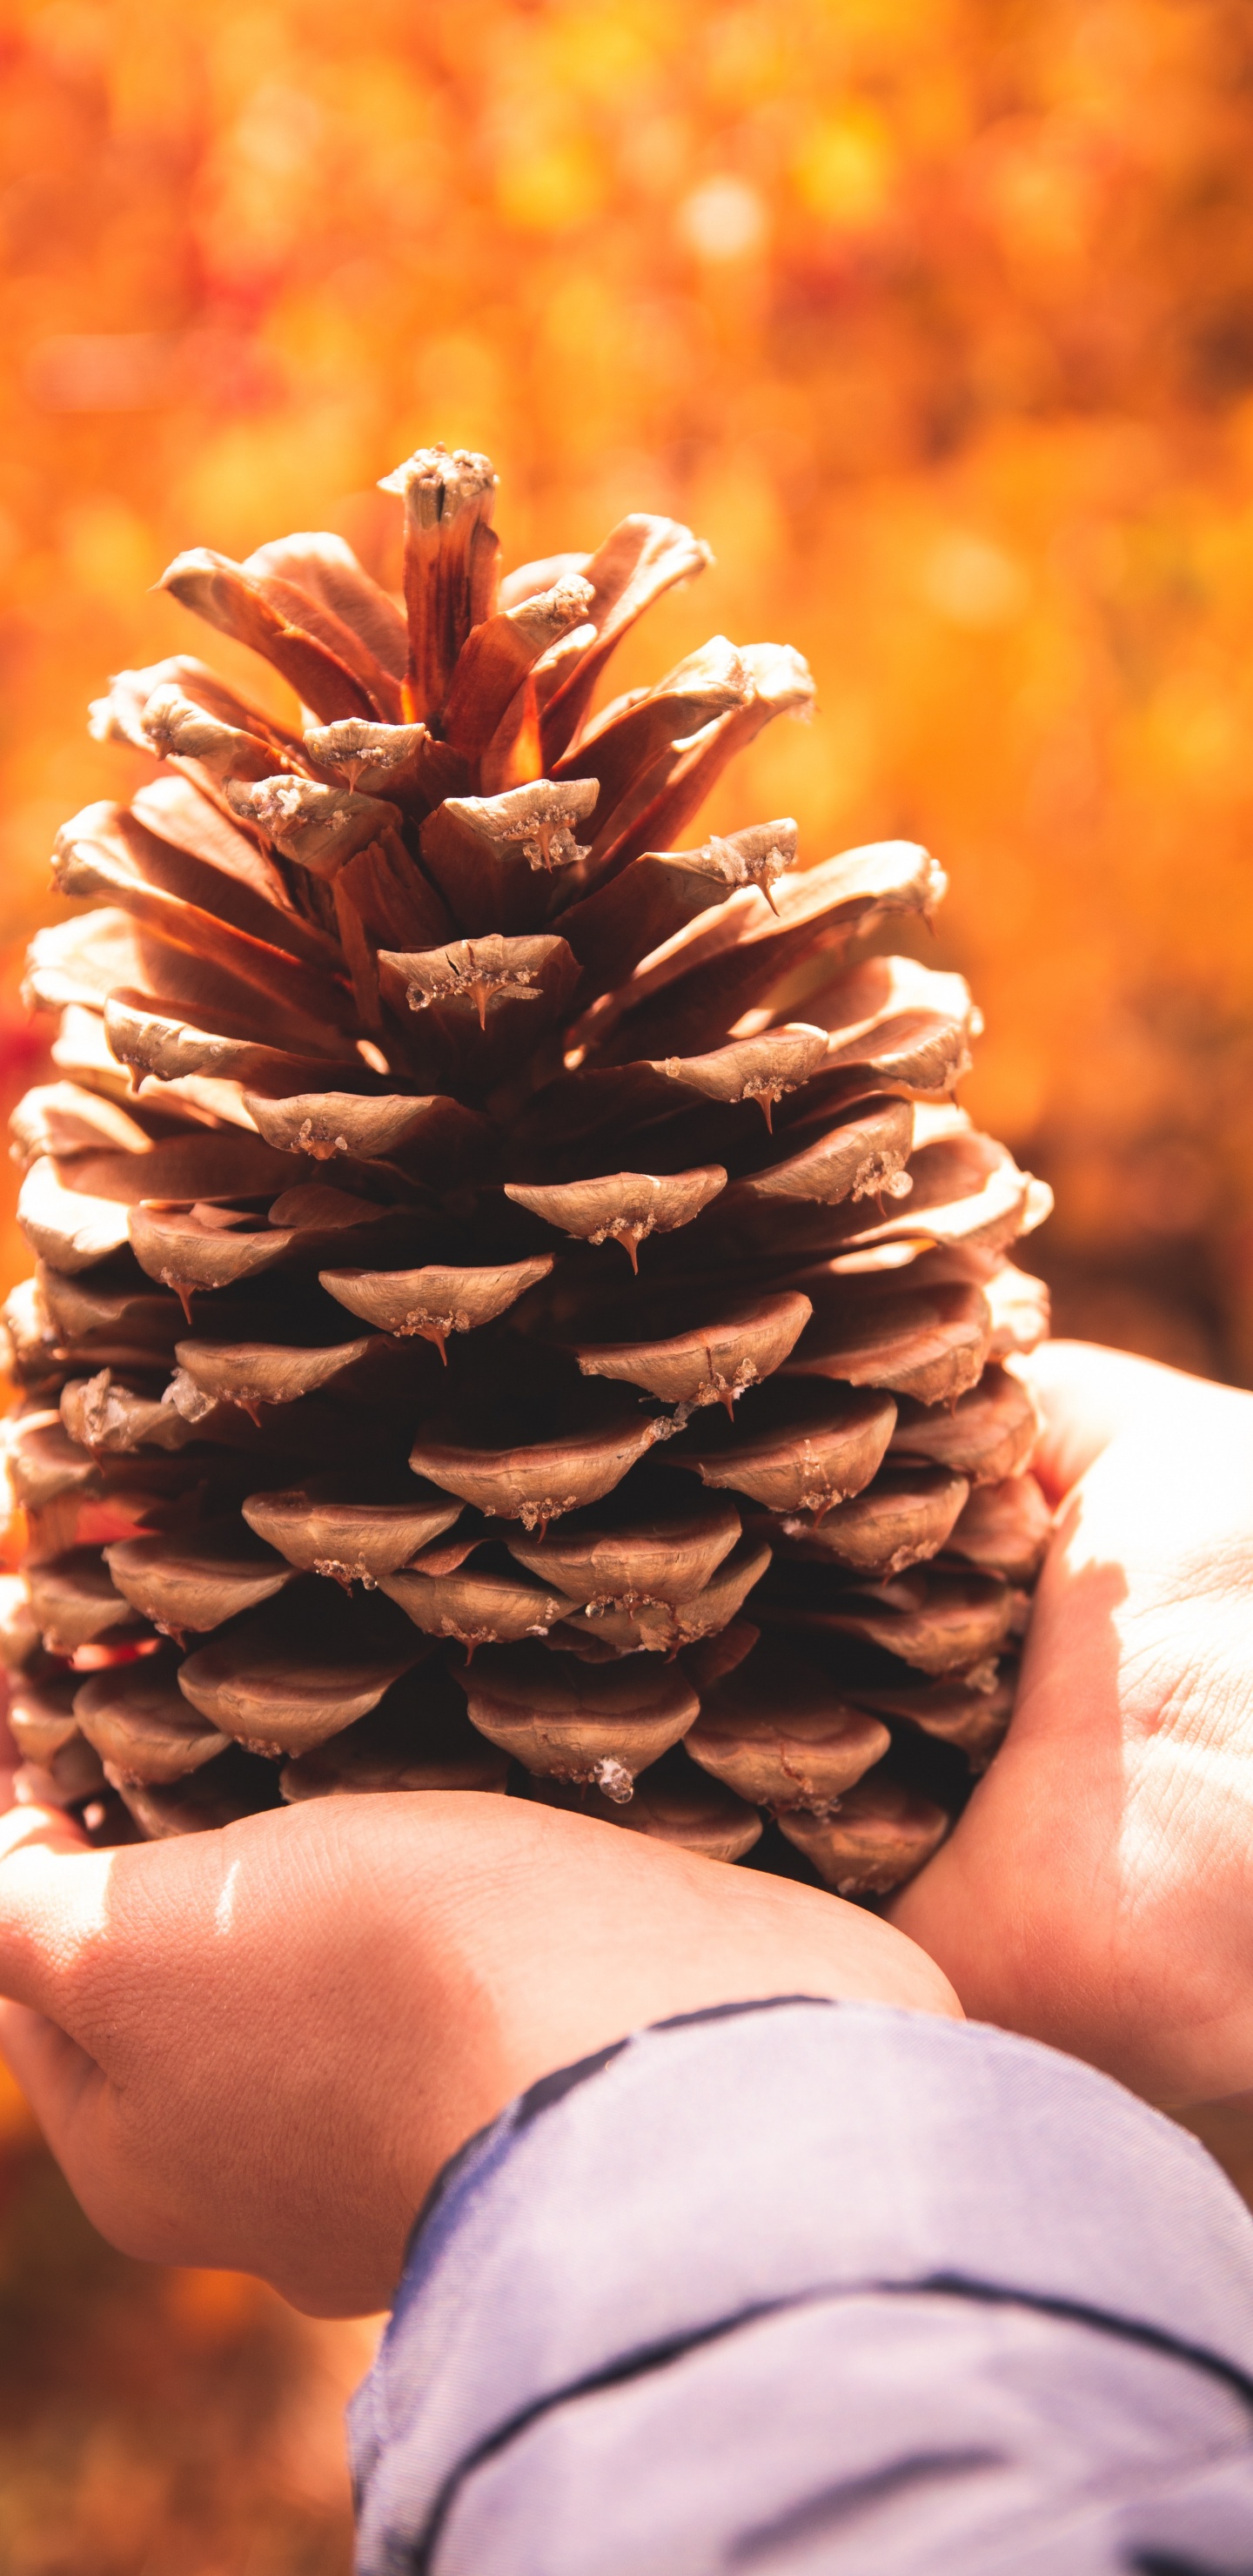 Person Holding Brown Pine Cone. Wallpaper in 1440x2960 Resolution